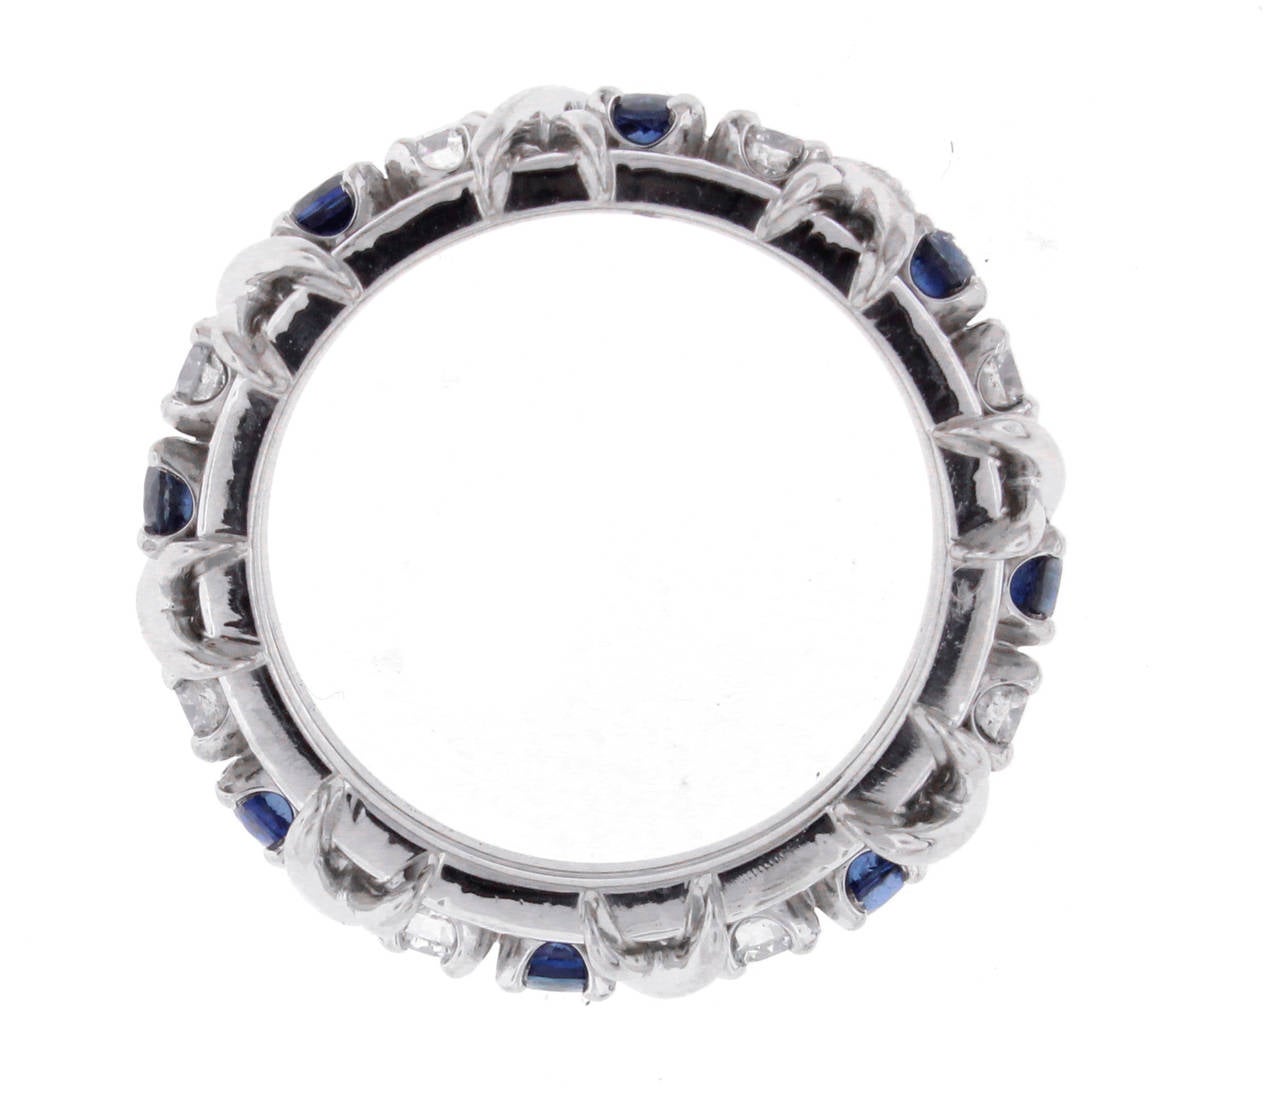 This iconic 16-stone Tiffany & Co. band ring was designed by Jean Schlumberger and features the classic X motif with 8 sapphires weighing .75 and 8 diamonds weighing .59 carats. Set in platinum, size 6 1/2